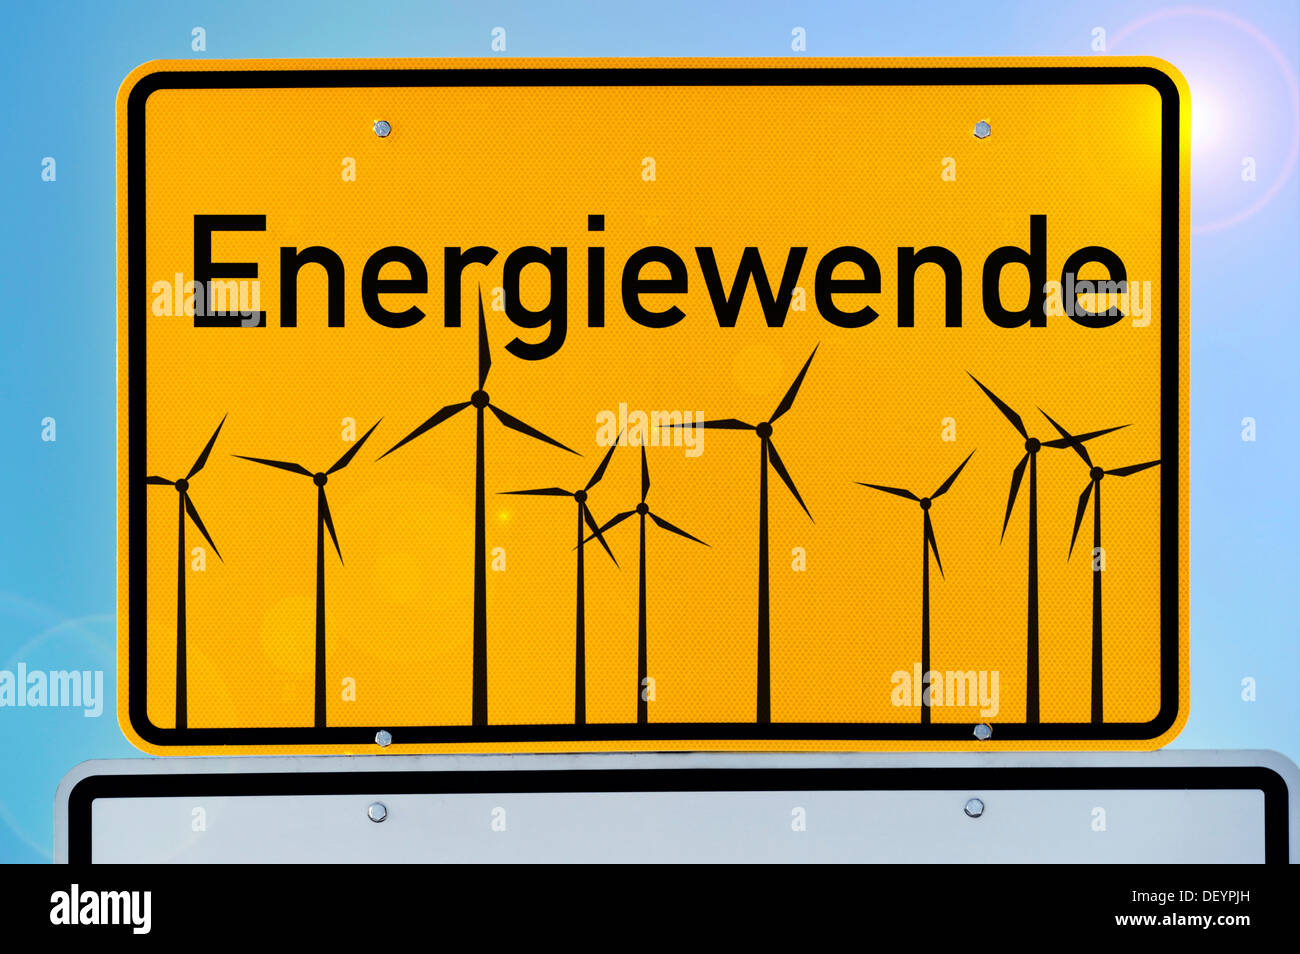 City limits sign with the word Energiewende or energy transition, symbolic image Stock Photo